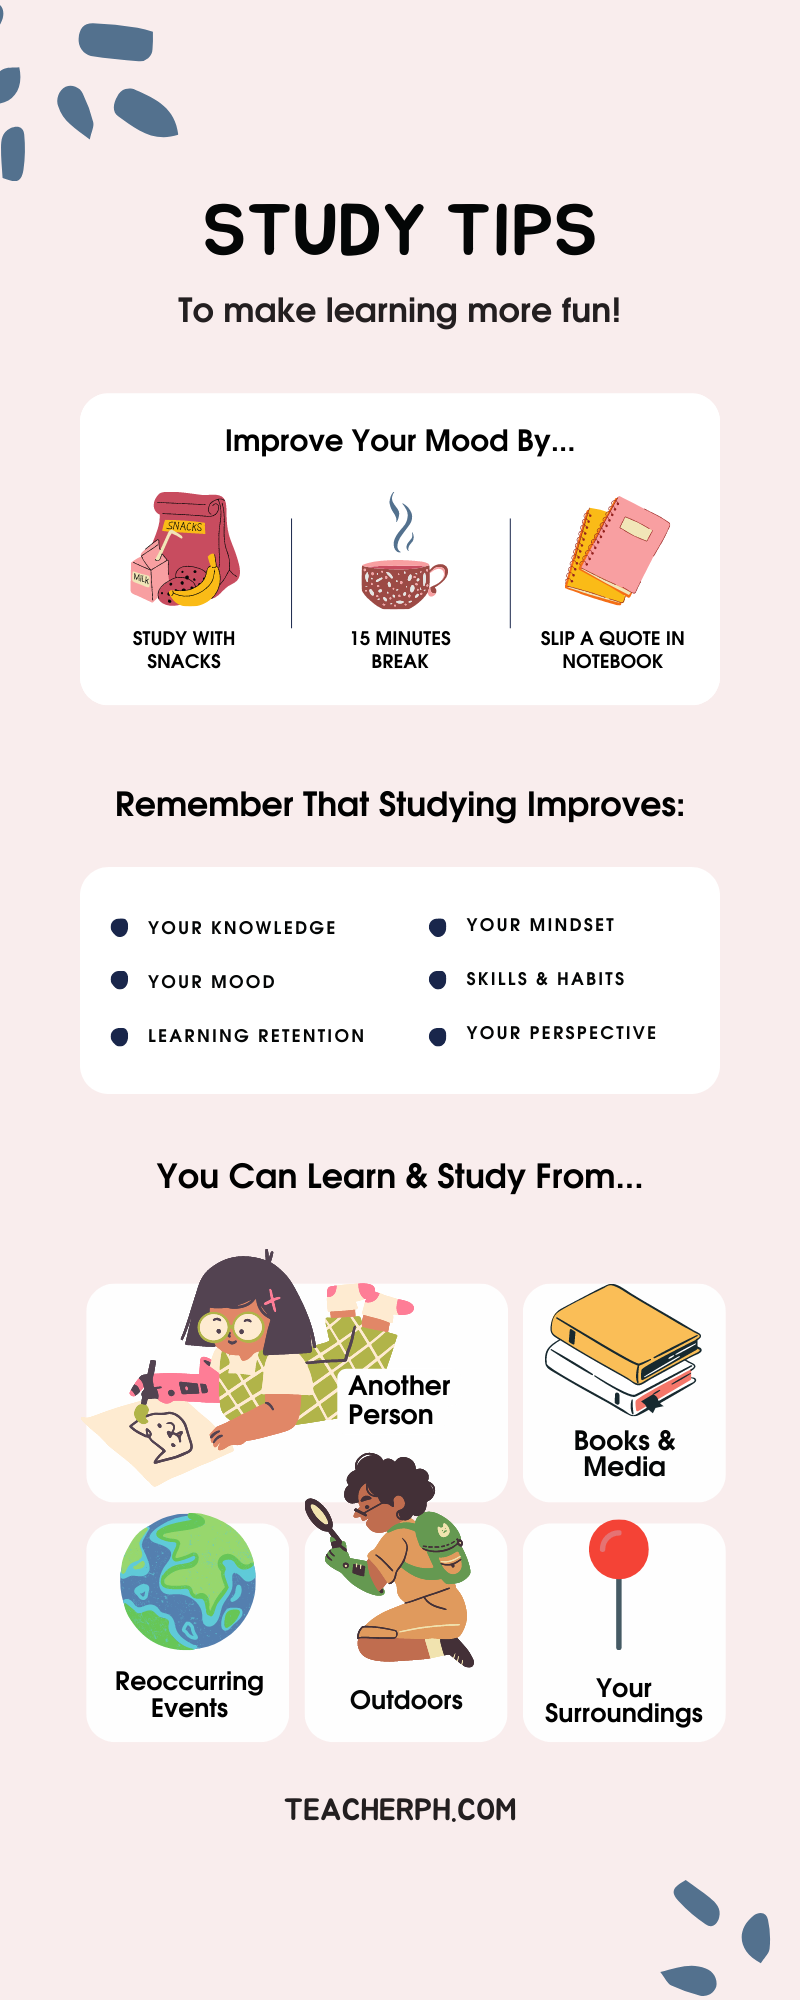 Study Tips to Make Learning More Fun